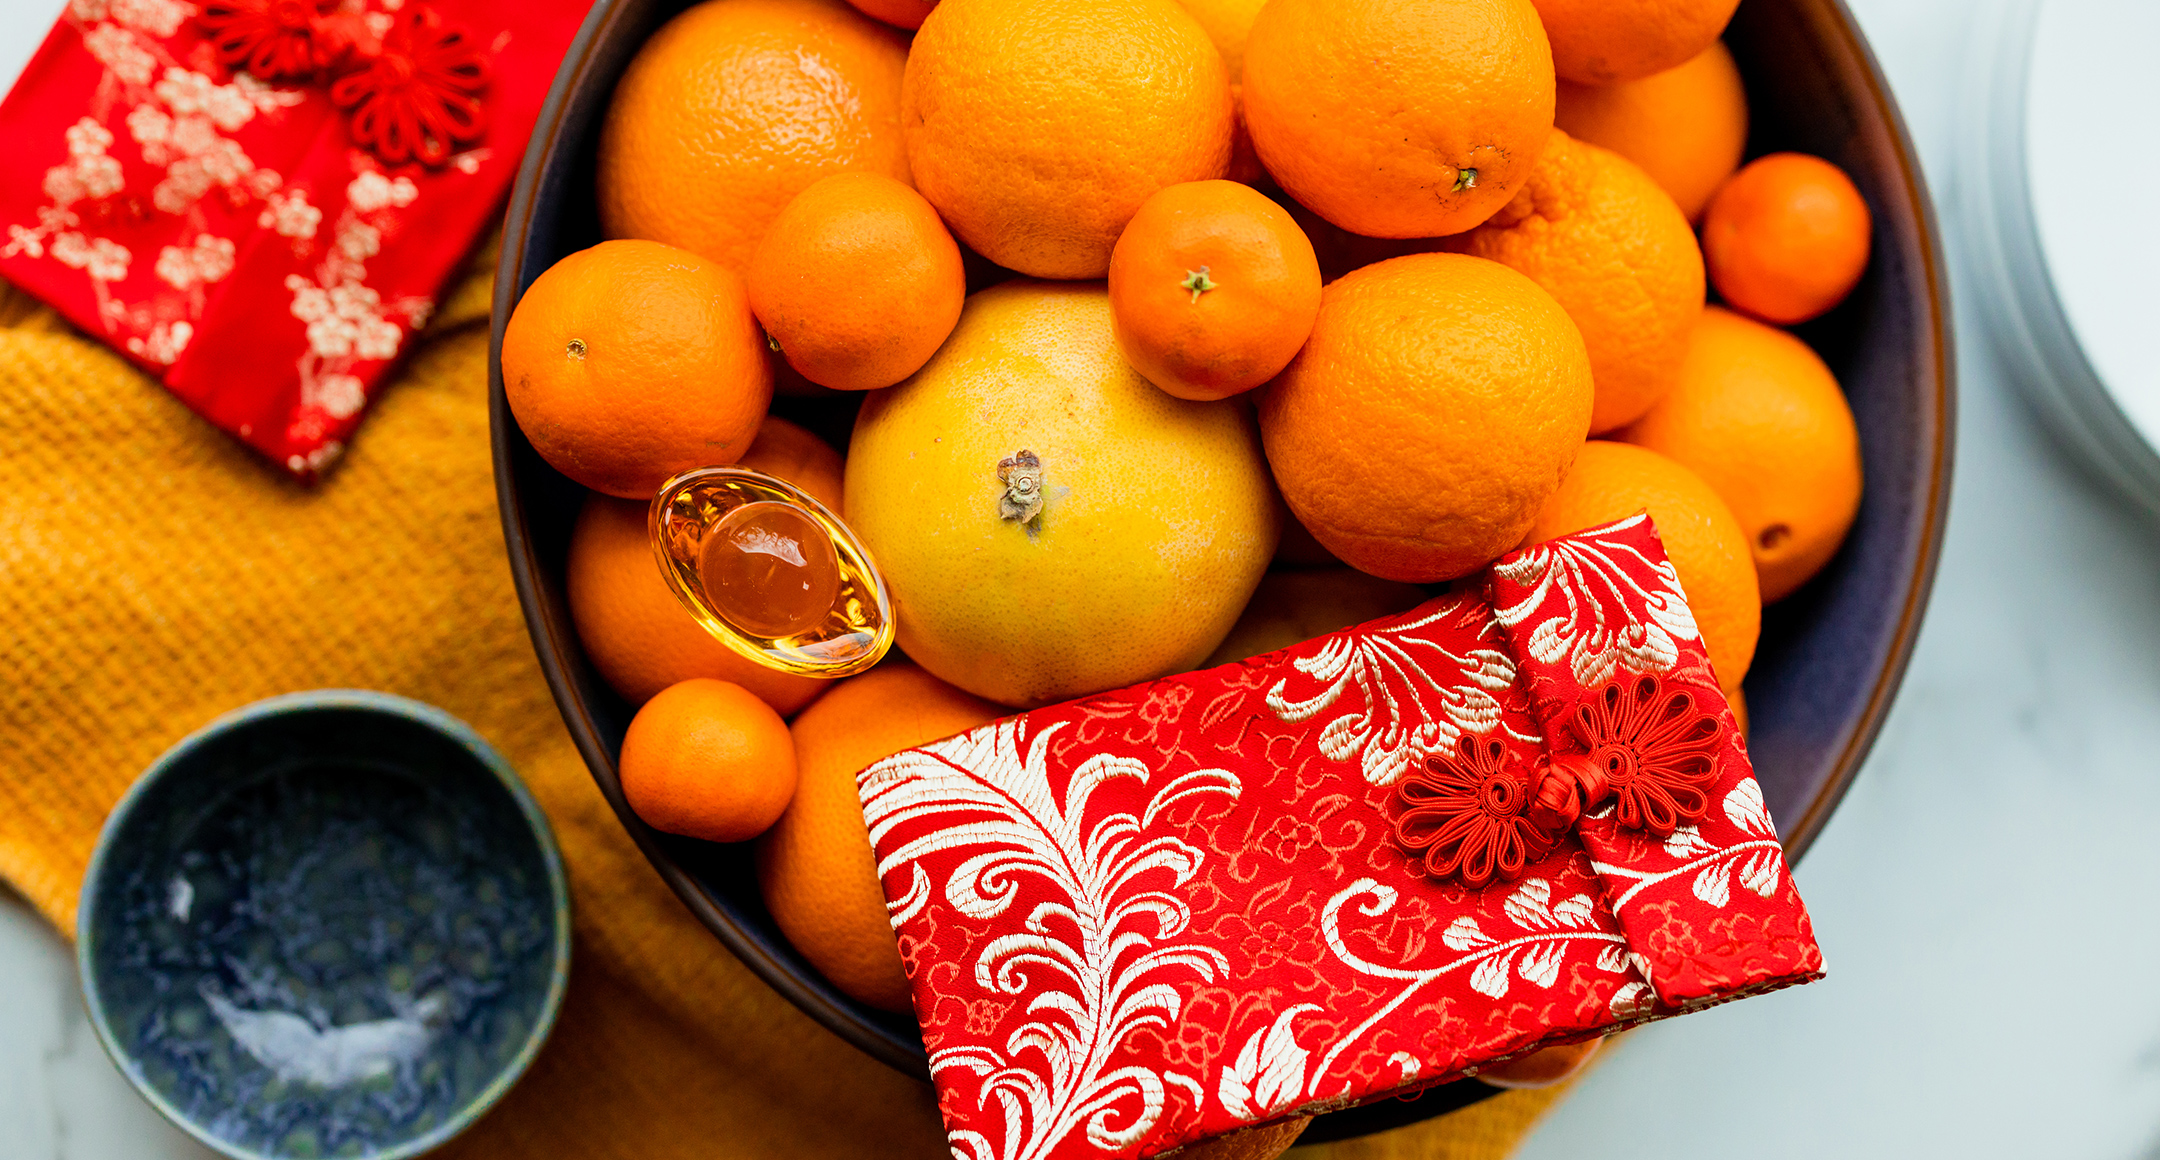 A bowl of vibrant orange citrus fruits and lucky red envelopes symbolize Lunar New Year. 